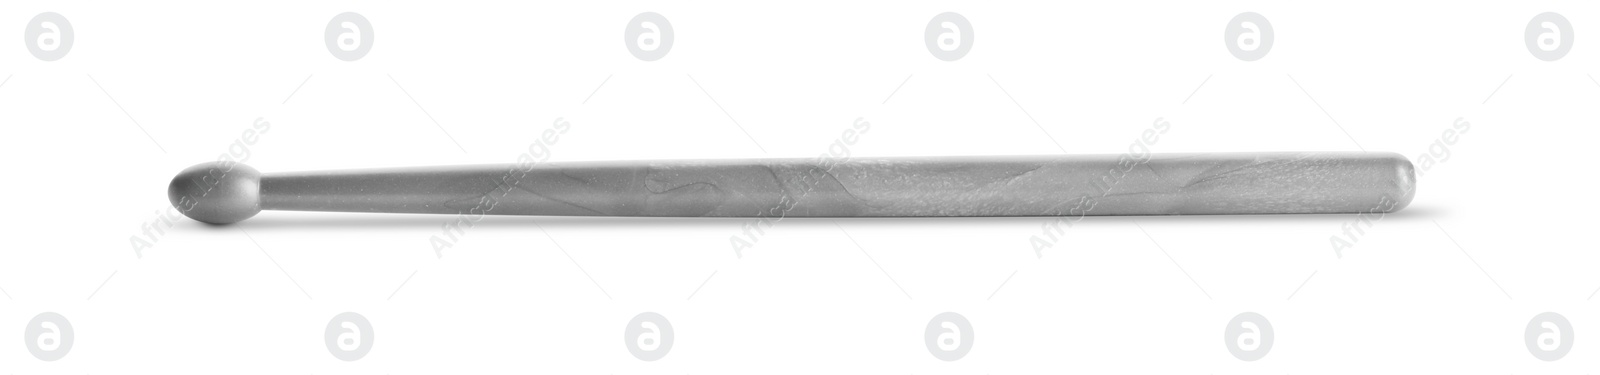 Photo of One grey drum stick isolated on white